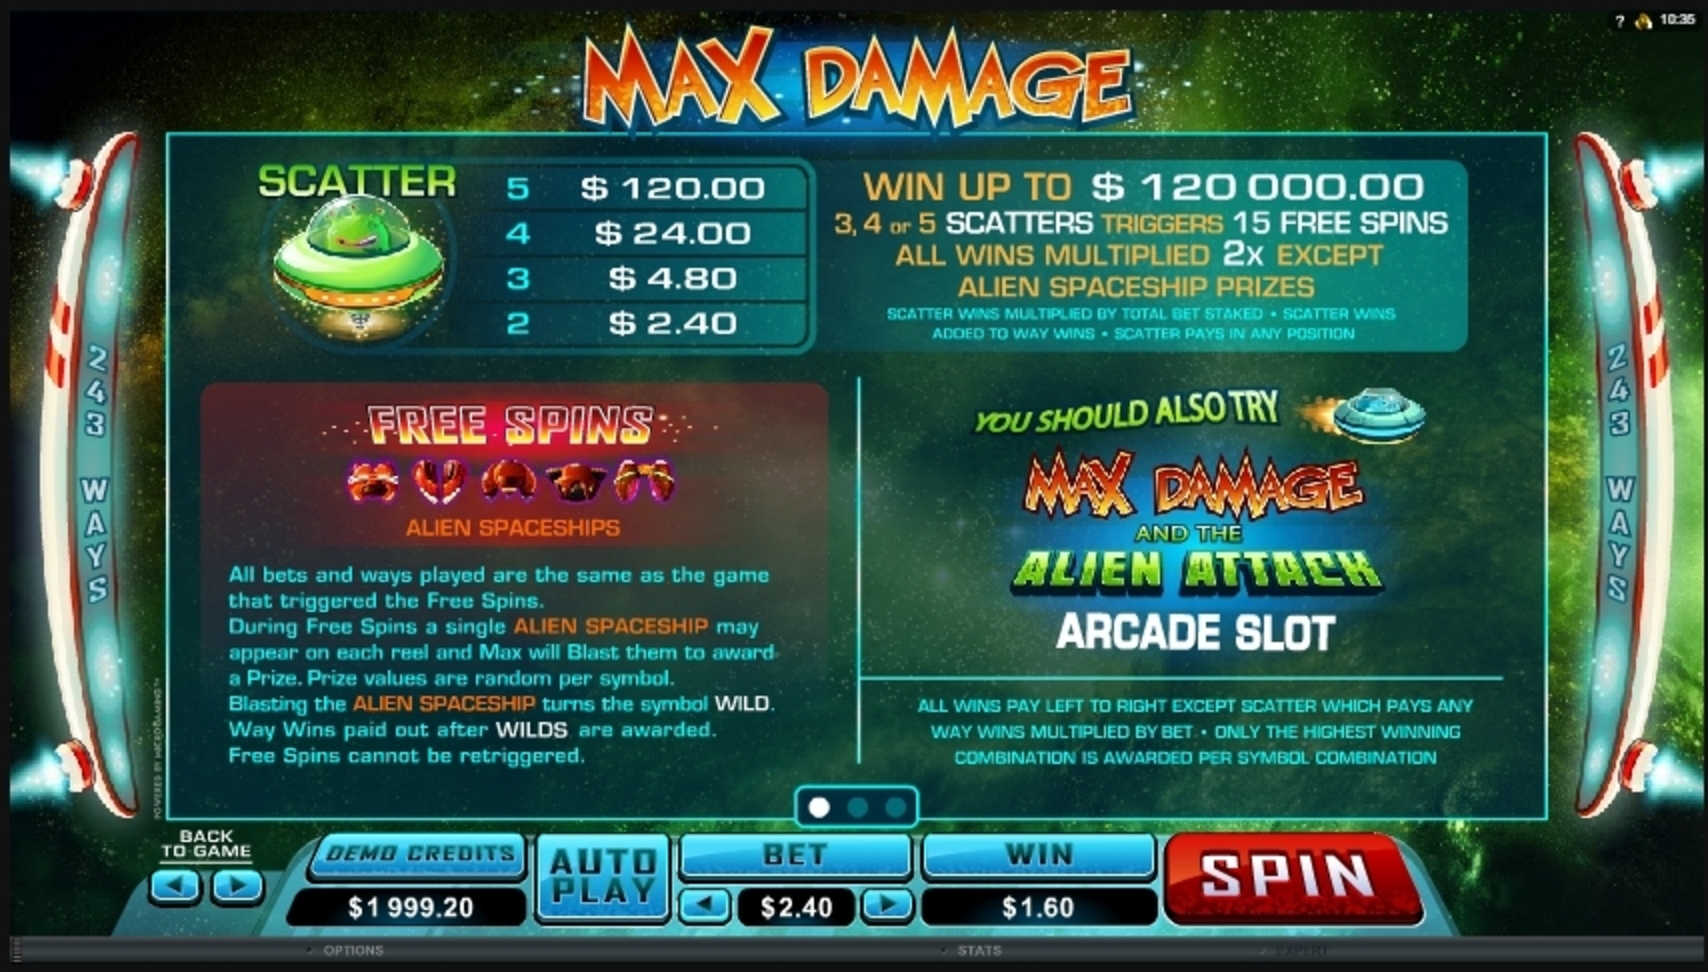 Info of Max Damage Slot Game by Microgaming